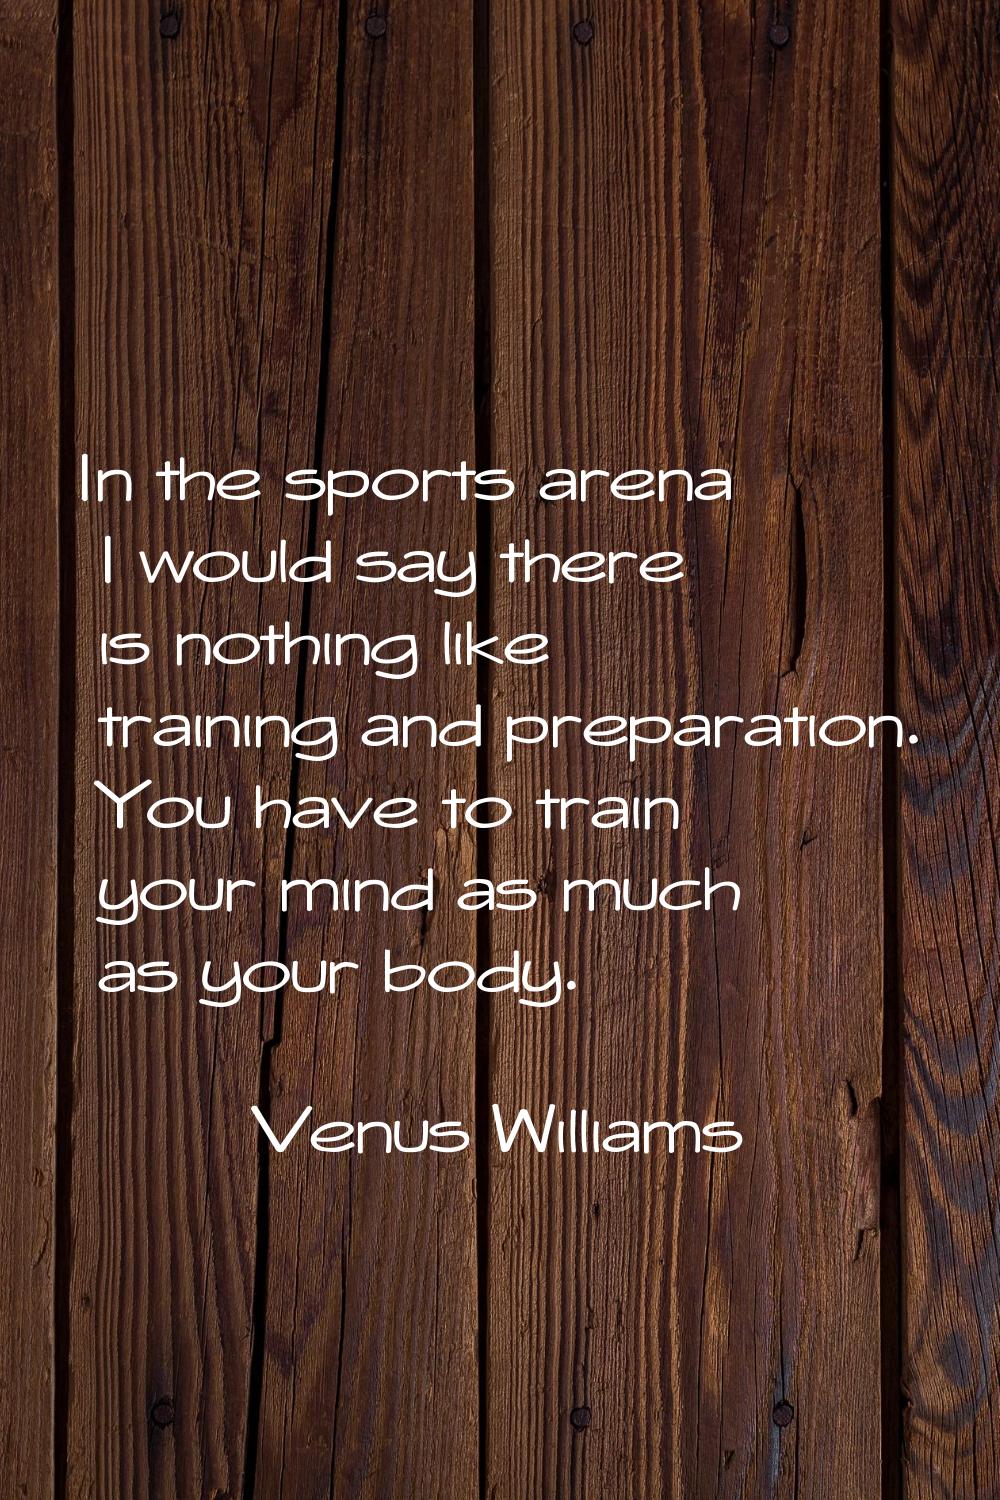 In the sports arena I would say there is nothing like training and preparation. You have to train y